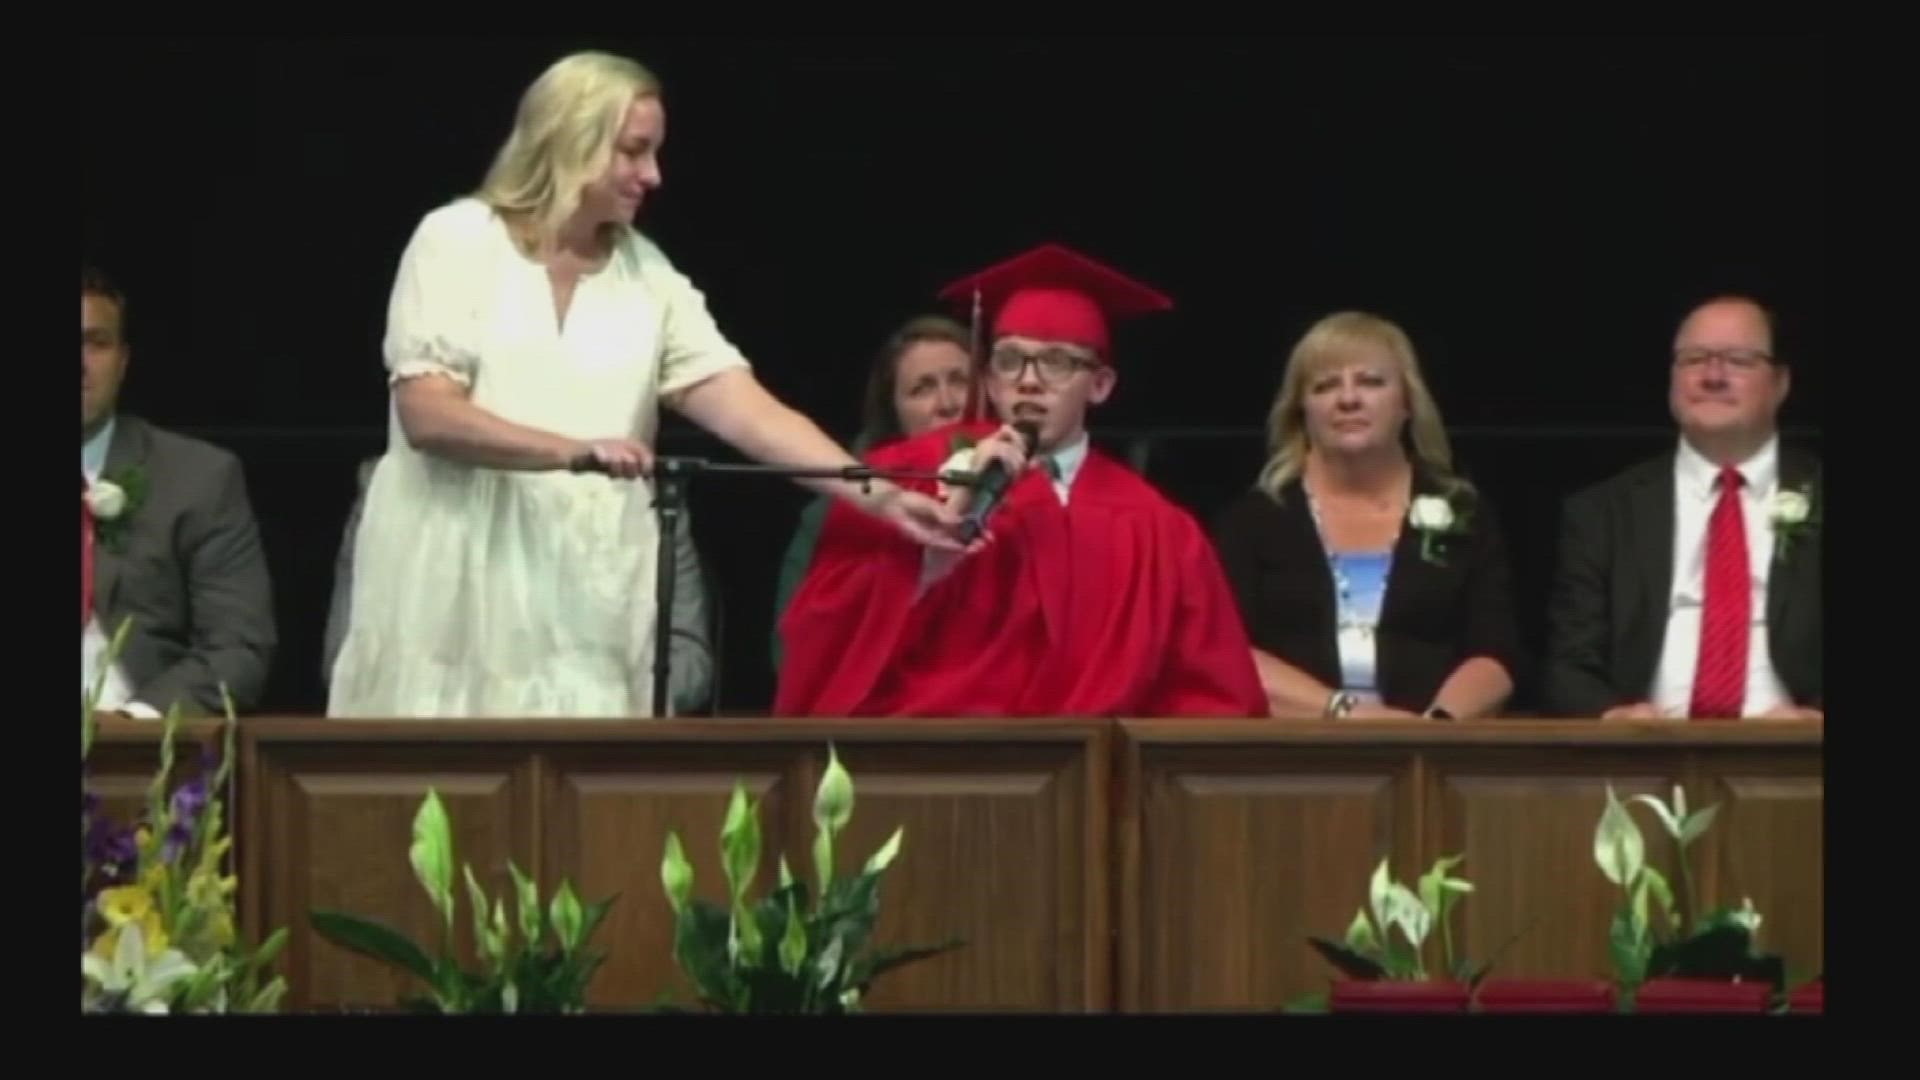 Max Brown’s positive attitude is a huge inspiration to the student body at his high school in Salt Lake City, Utah.